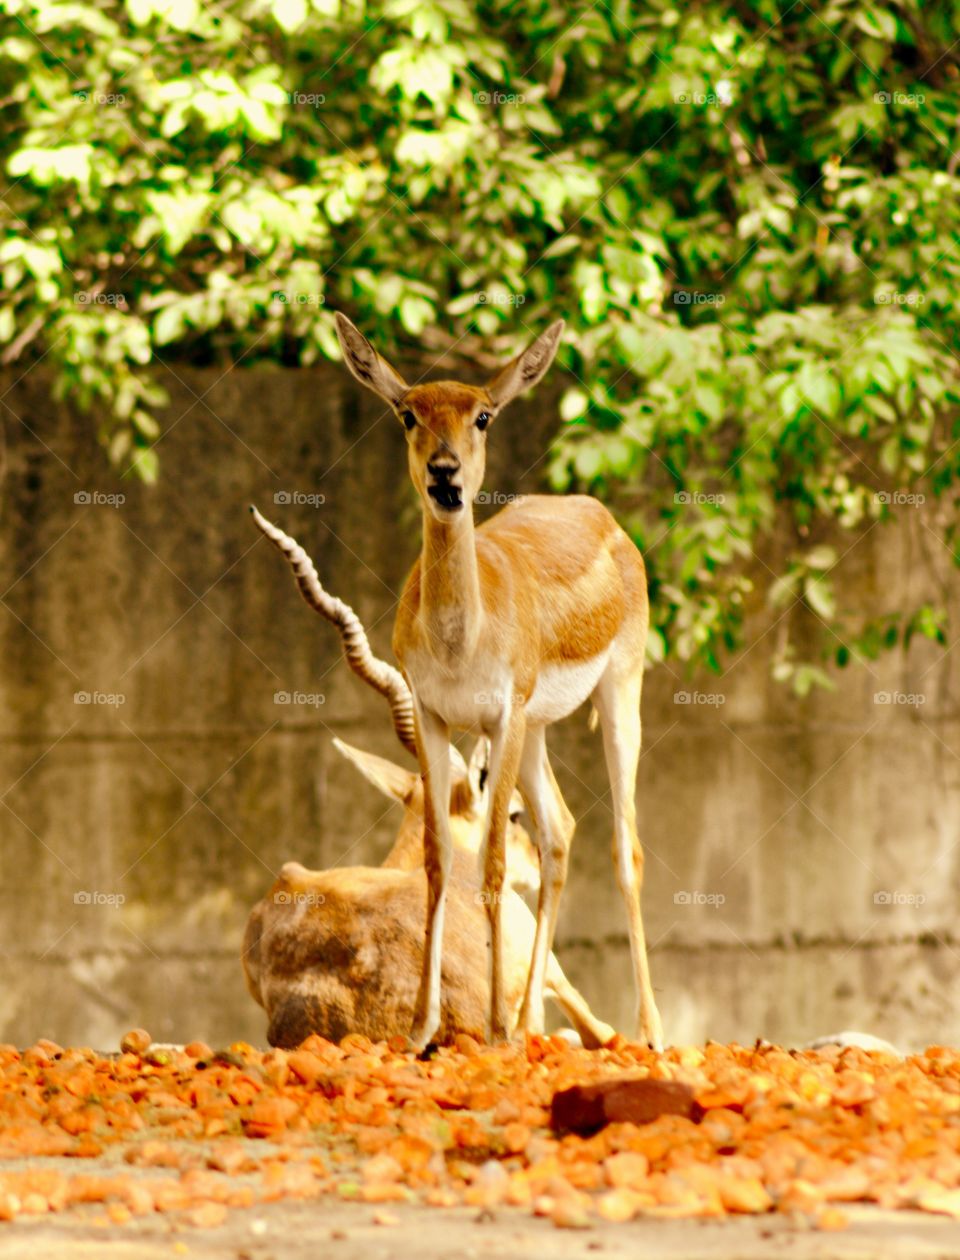 
This must be a deer , goddess Sita would have admired in Vanvas.
Well right now she's busy posing herself for a click like a model  while others are busy having meals.
Looks nothing less than a beautiful model and a showstopper on a ramp .
They are one of the best swimmer and runs very fast . Very agile in nature and have great reflexes .
You can check her attributes on lot of vedios available.
God save her from the hunter .
Kudos to this beautiful creature on  earth , which looks so innocent.
